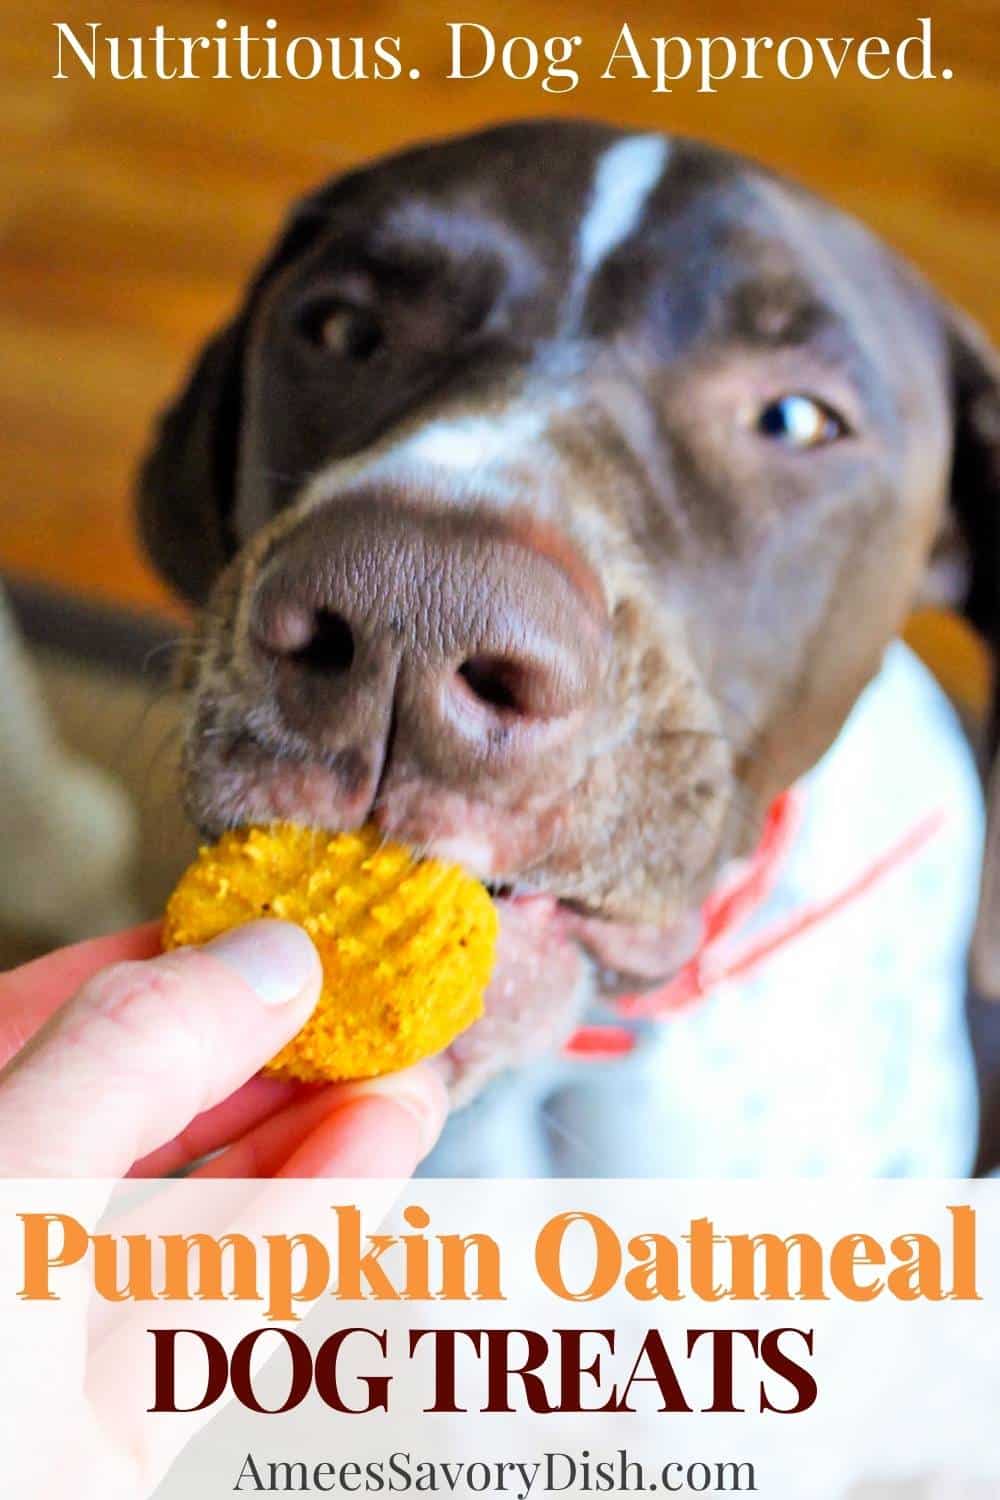 Treat man's best friend to these drool-worthy homemade Pumpkin Oatmeal Dog Treats! Easy to make and made with wholesome real food ingredients. via @Ameessavorydish